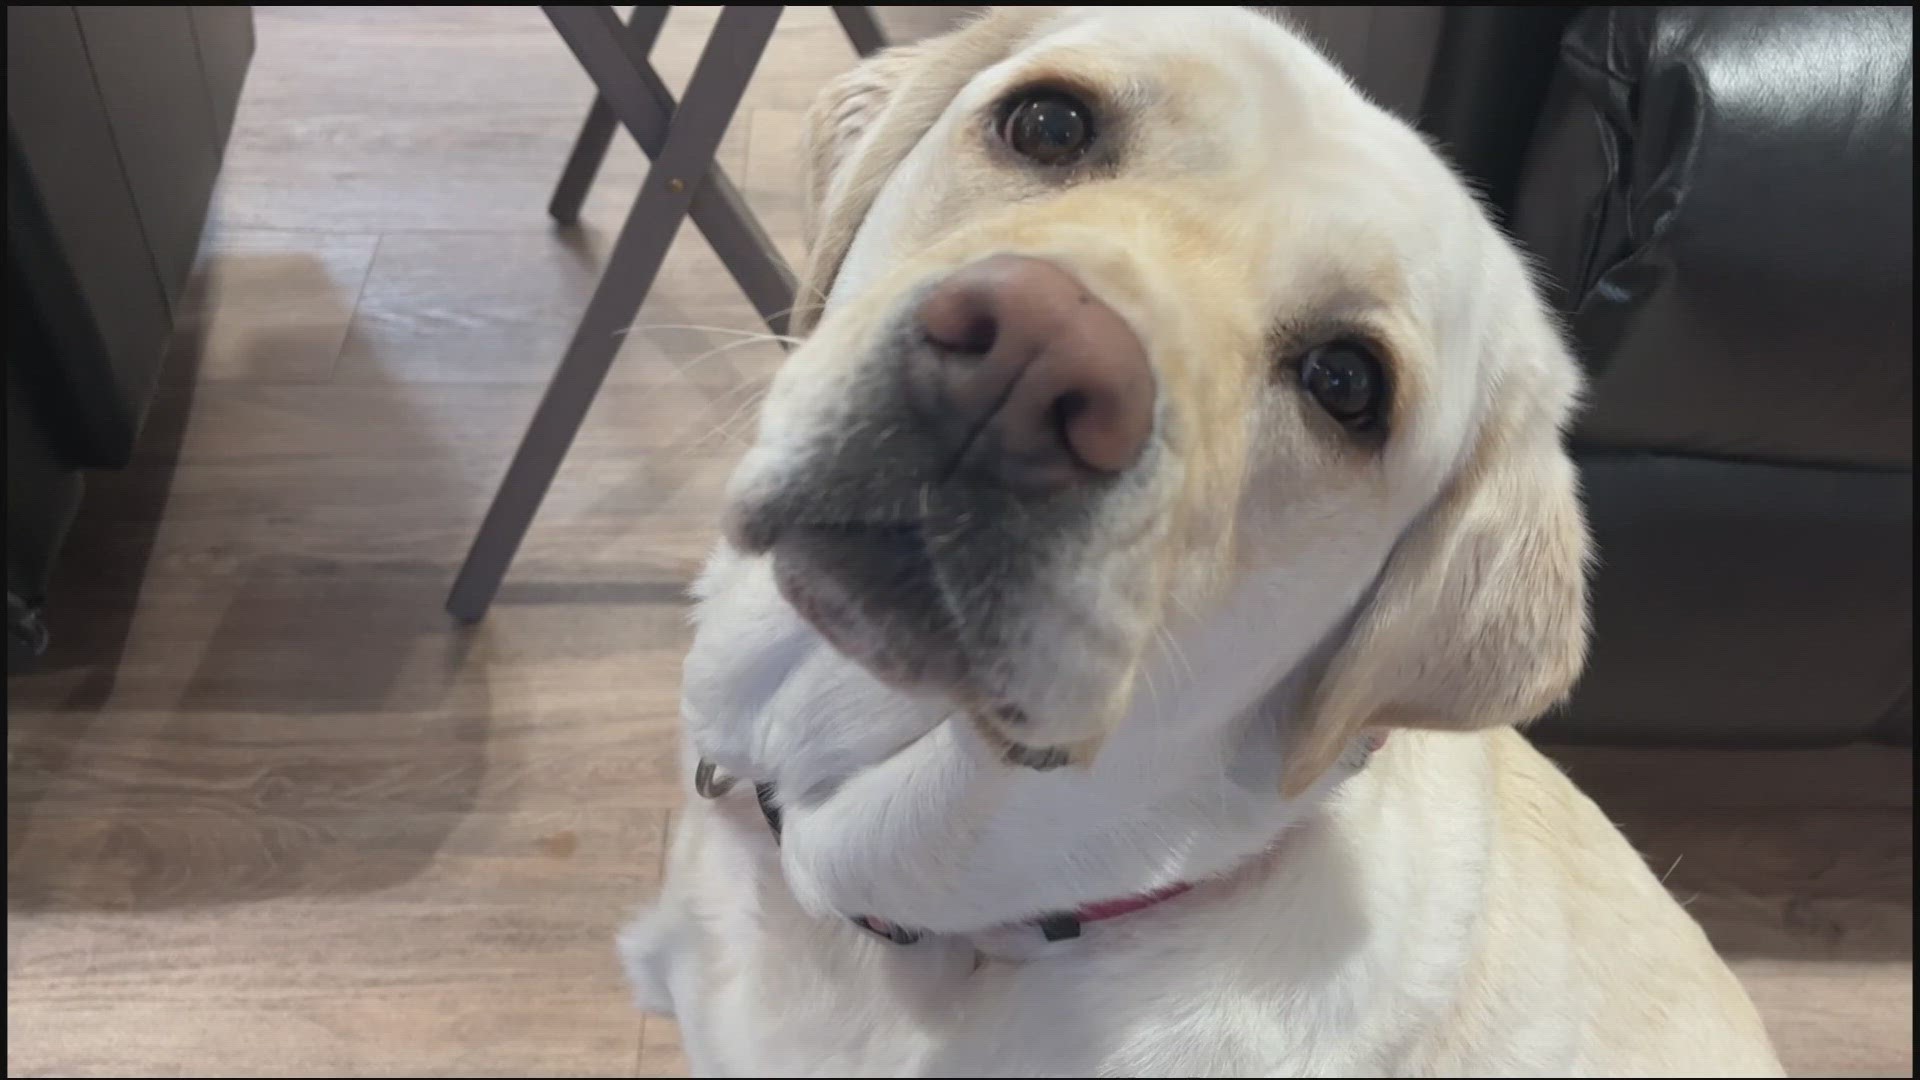 Meet Annie, the 5-year-old English lab that's meant to reduce stress for the firefighters. She's a part of the station's new dog mental health program.